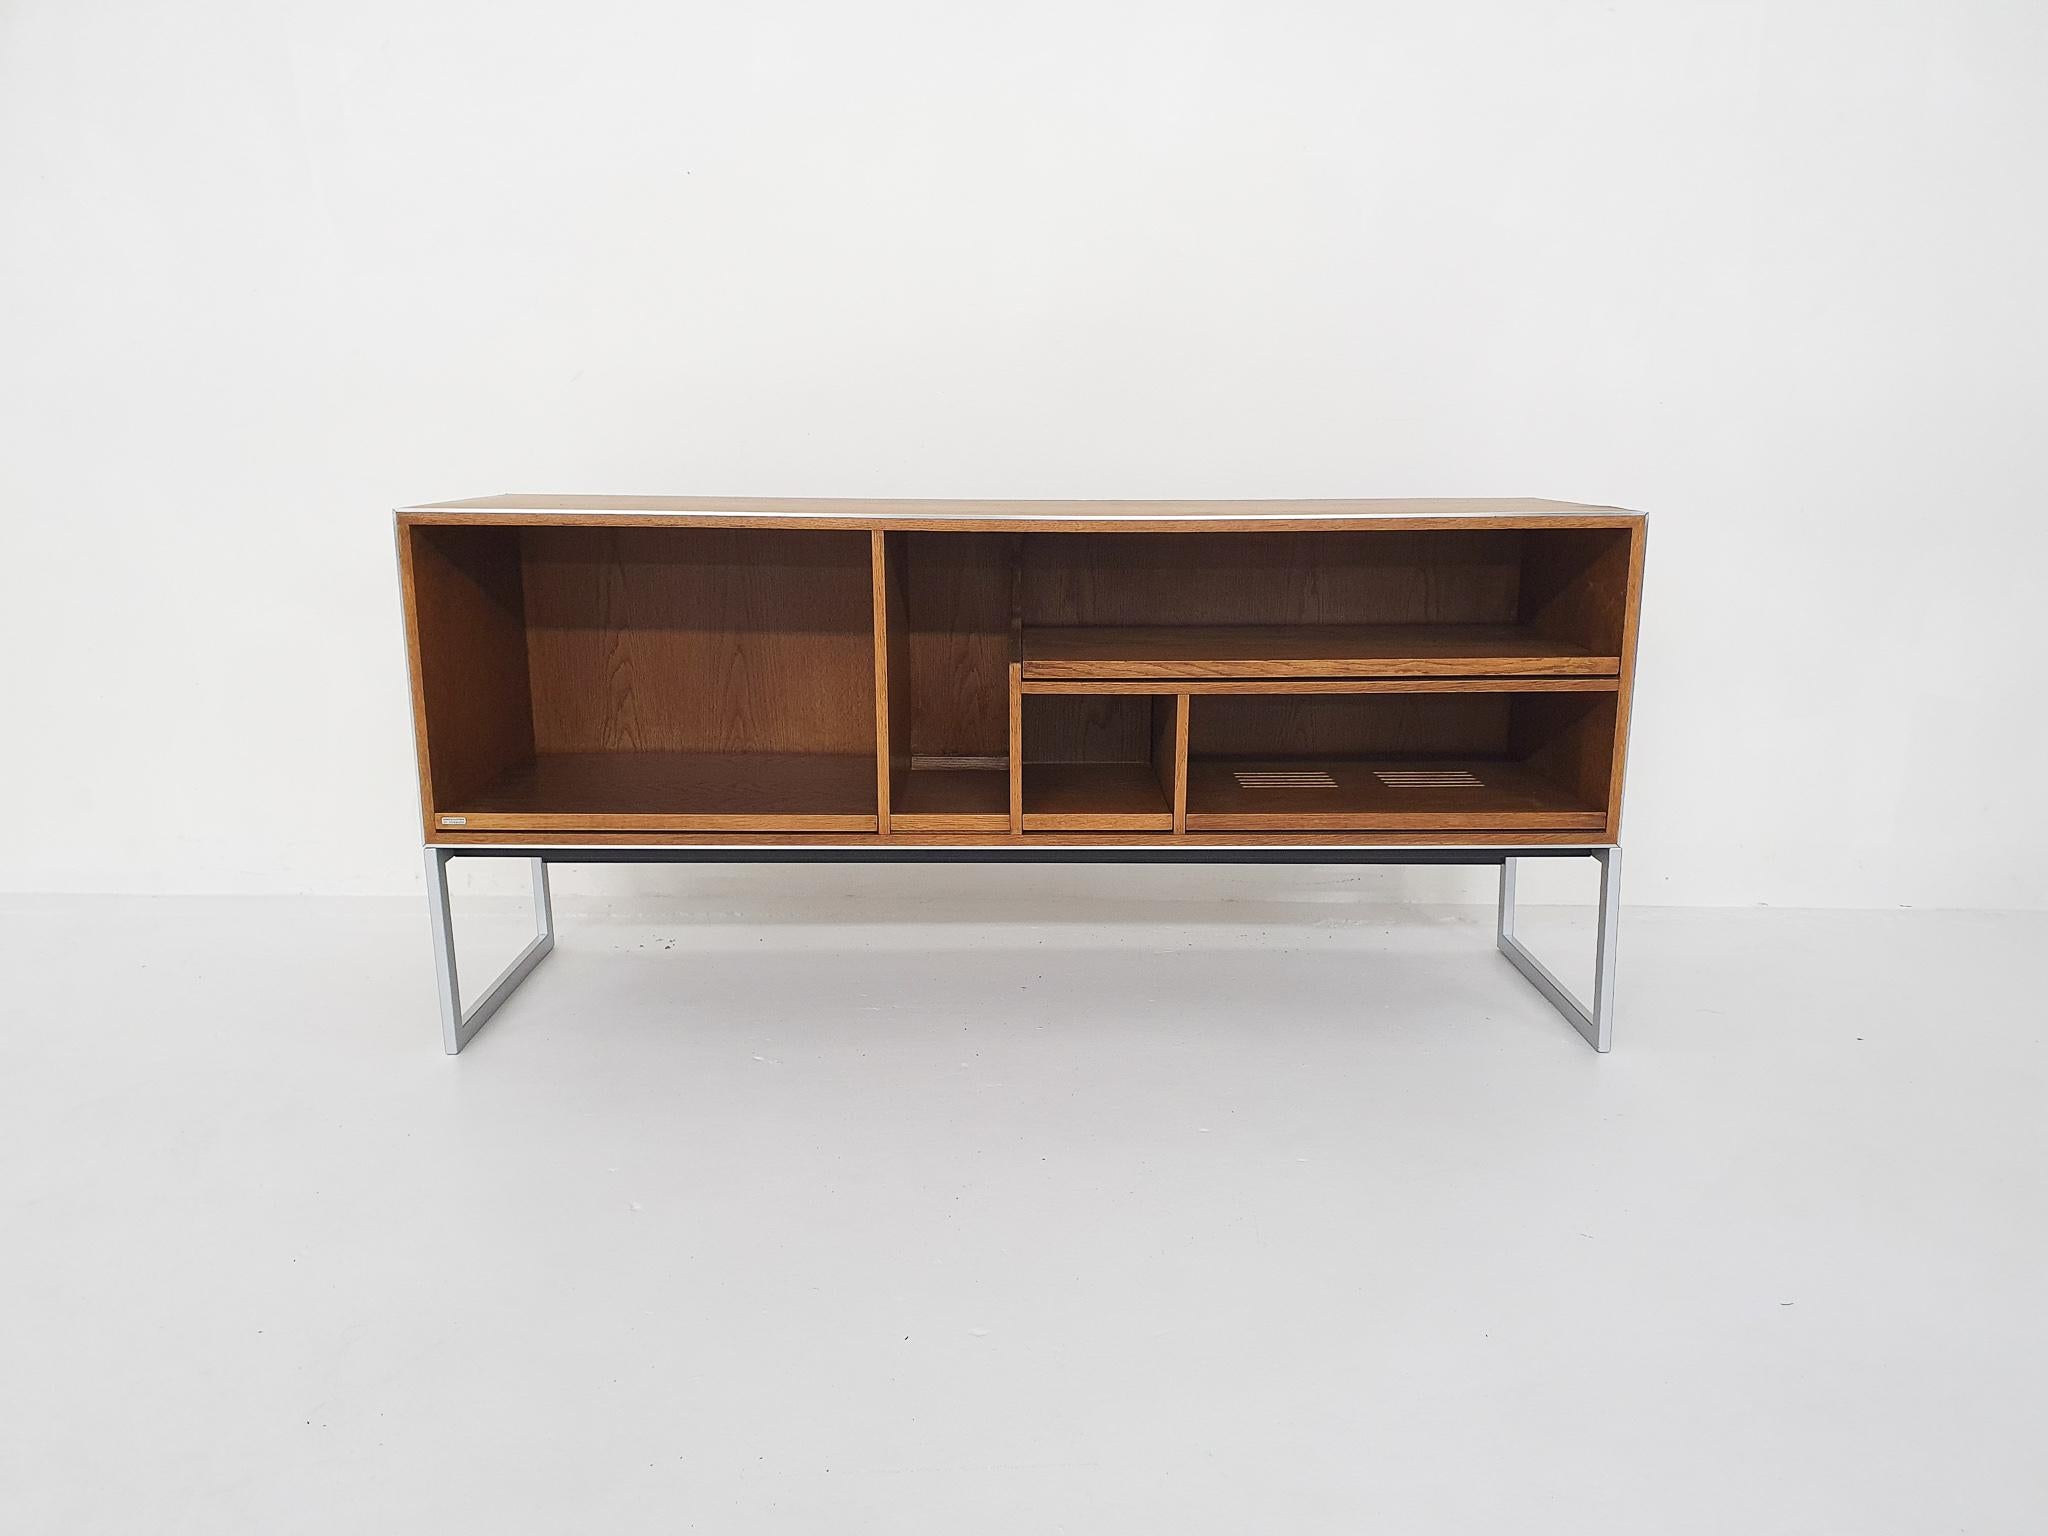 Vintage cabinet, model MC40, for storing hi-fi equipment. Made by Bang & Olufsen and designed by Danish Mid-Century designer Jacob Jensen in the 1970s.

If you are looking for a vintage cabinet for storing your audio equipment, your choice is